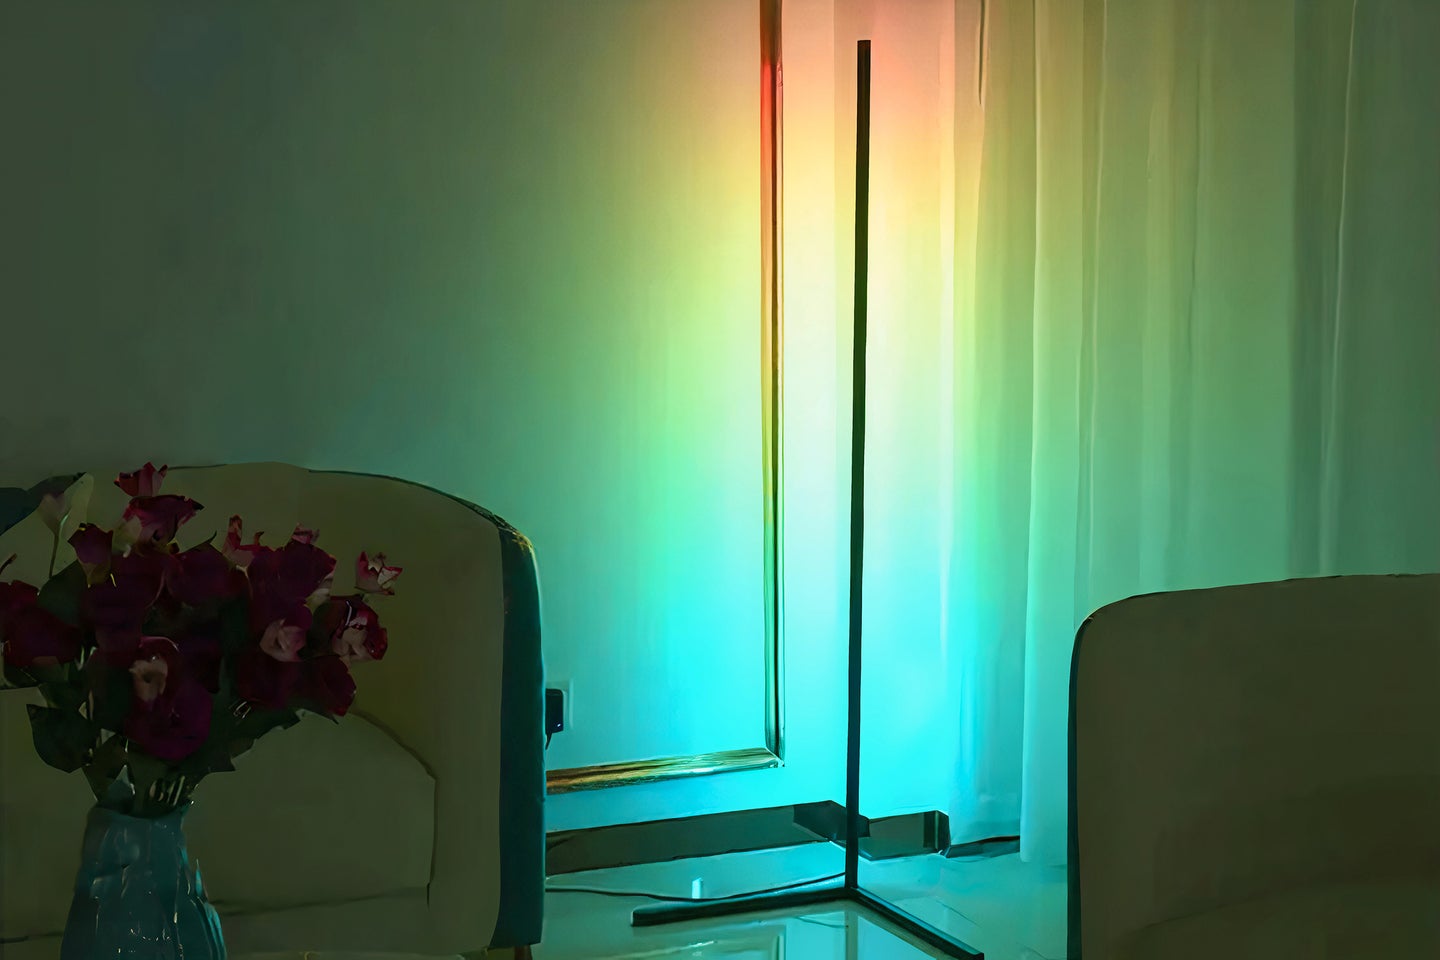 A LED corner lamp shines a rainbow-colored light on a blank wall